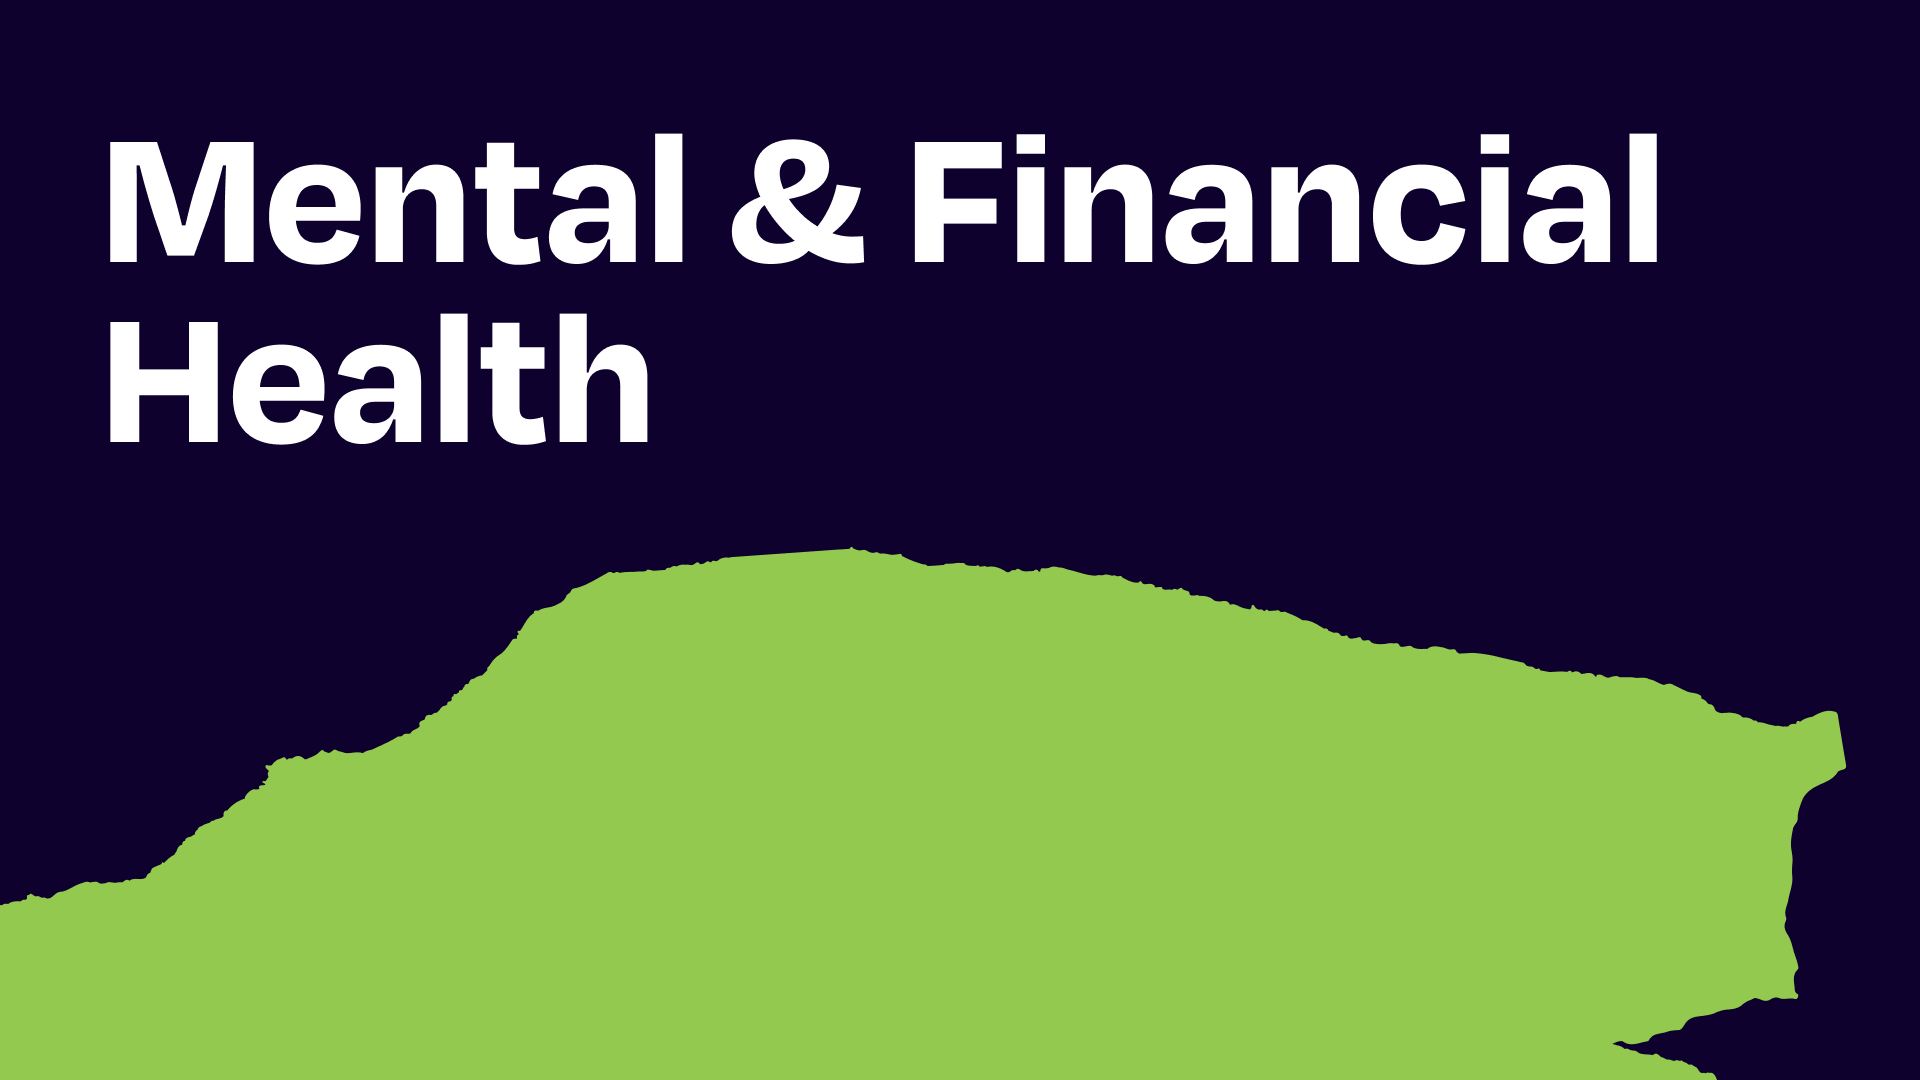 8 ways to get employees talking about financial wellbeing and mental health